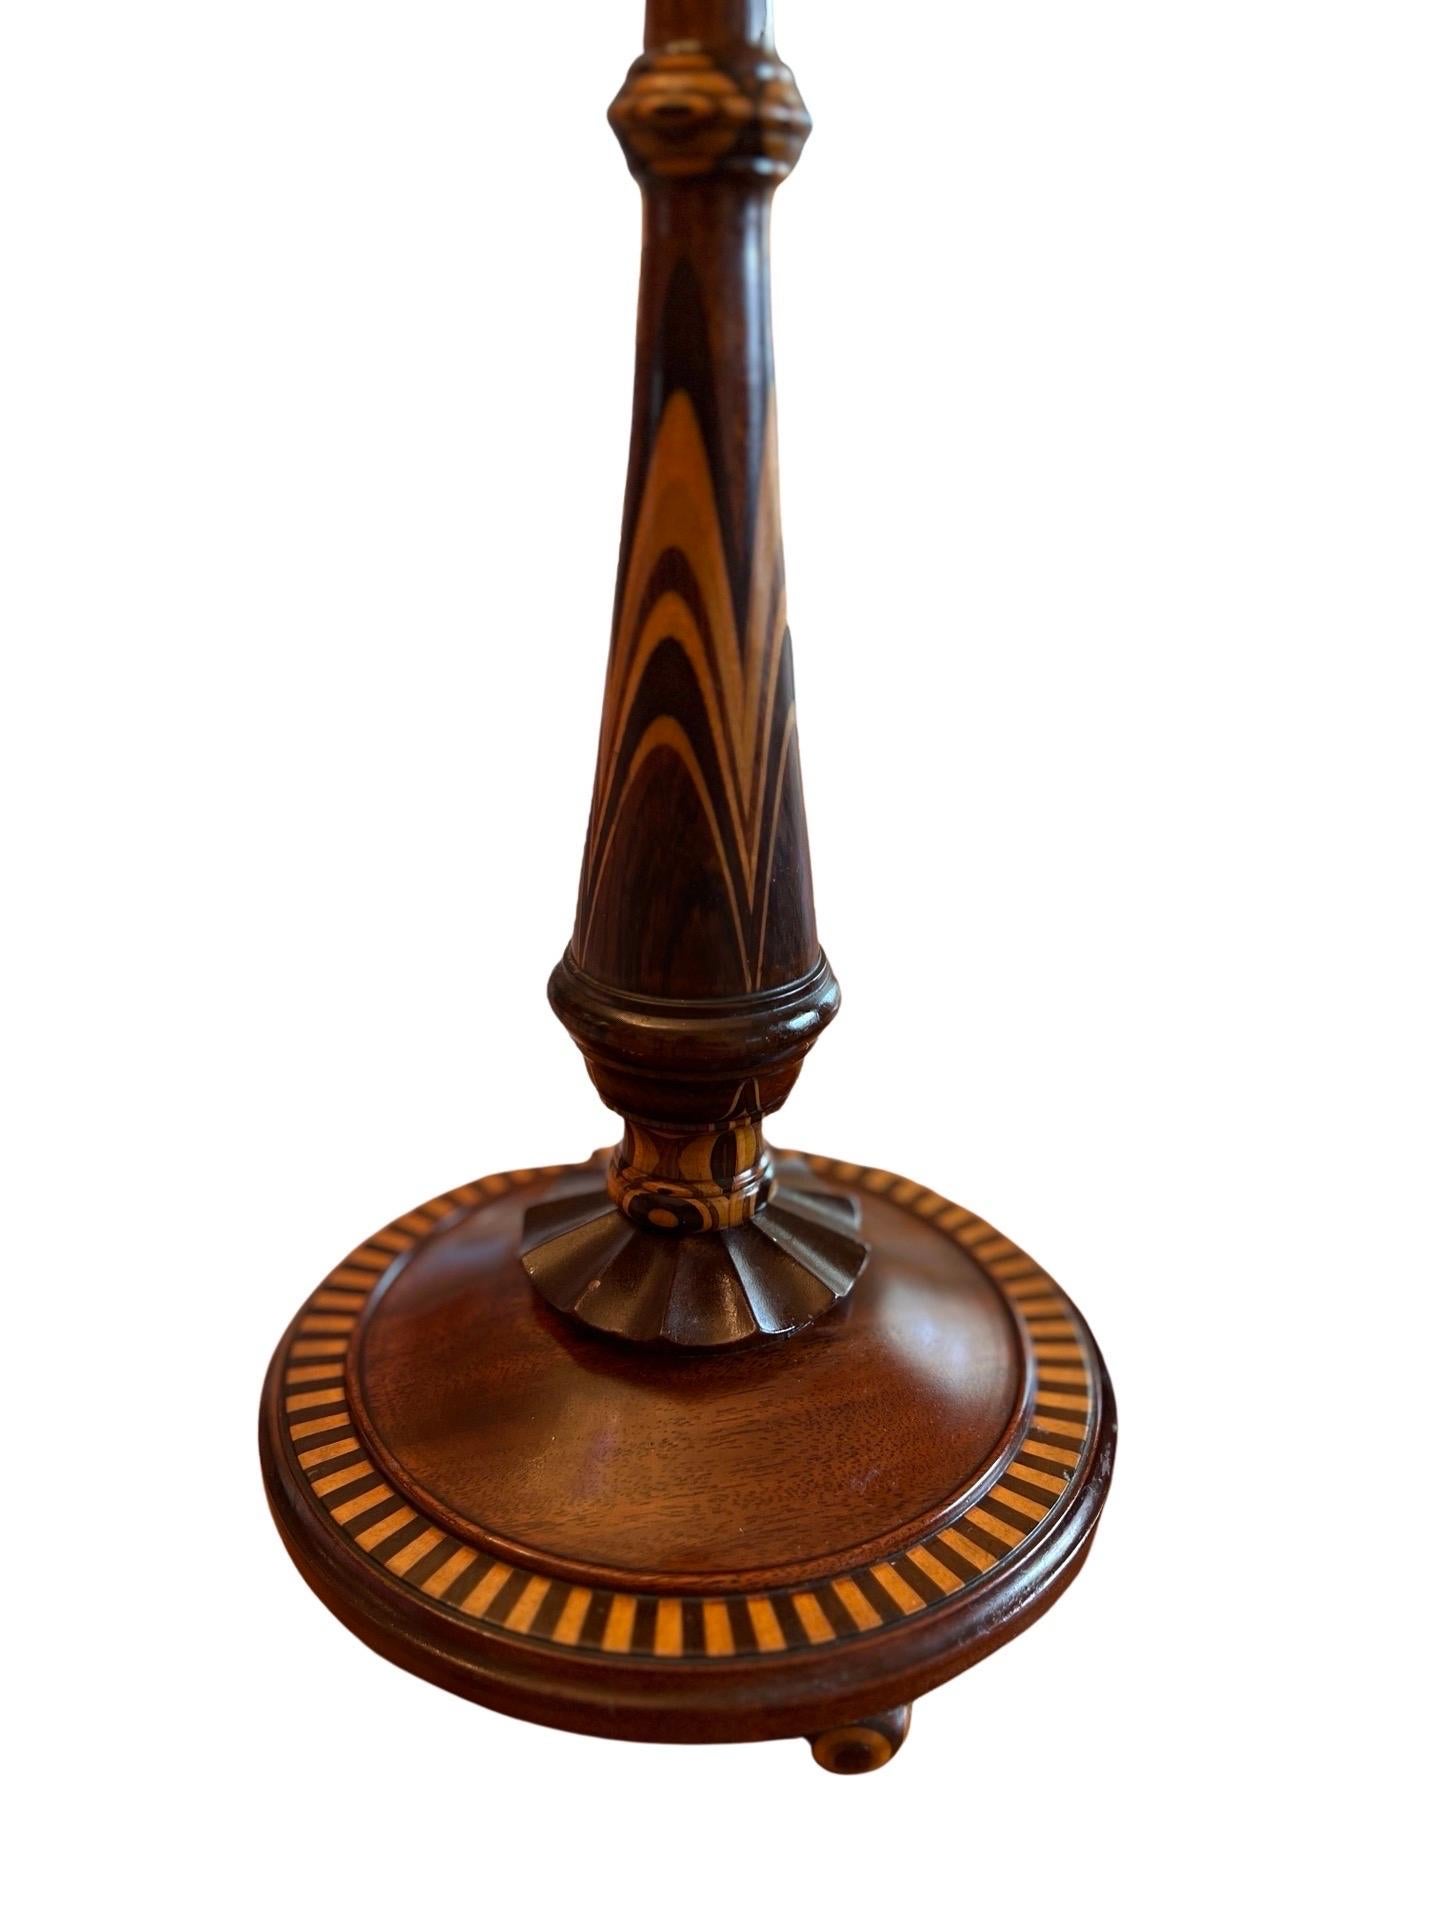 Fine American Turned Walnut & Mixed Marquetry Wood Candlesticks, circa 1925 For Sale 2